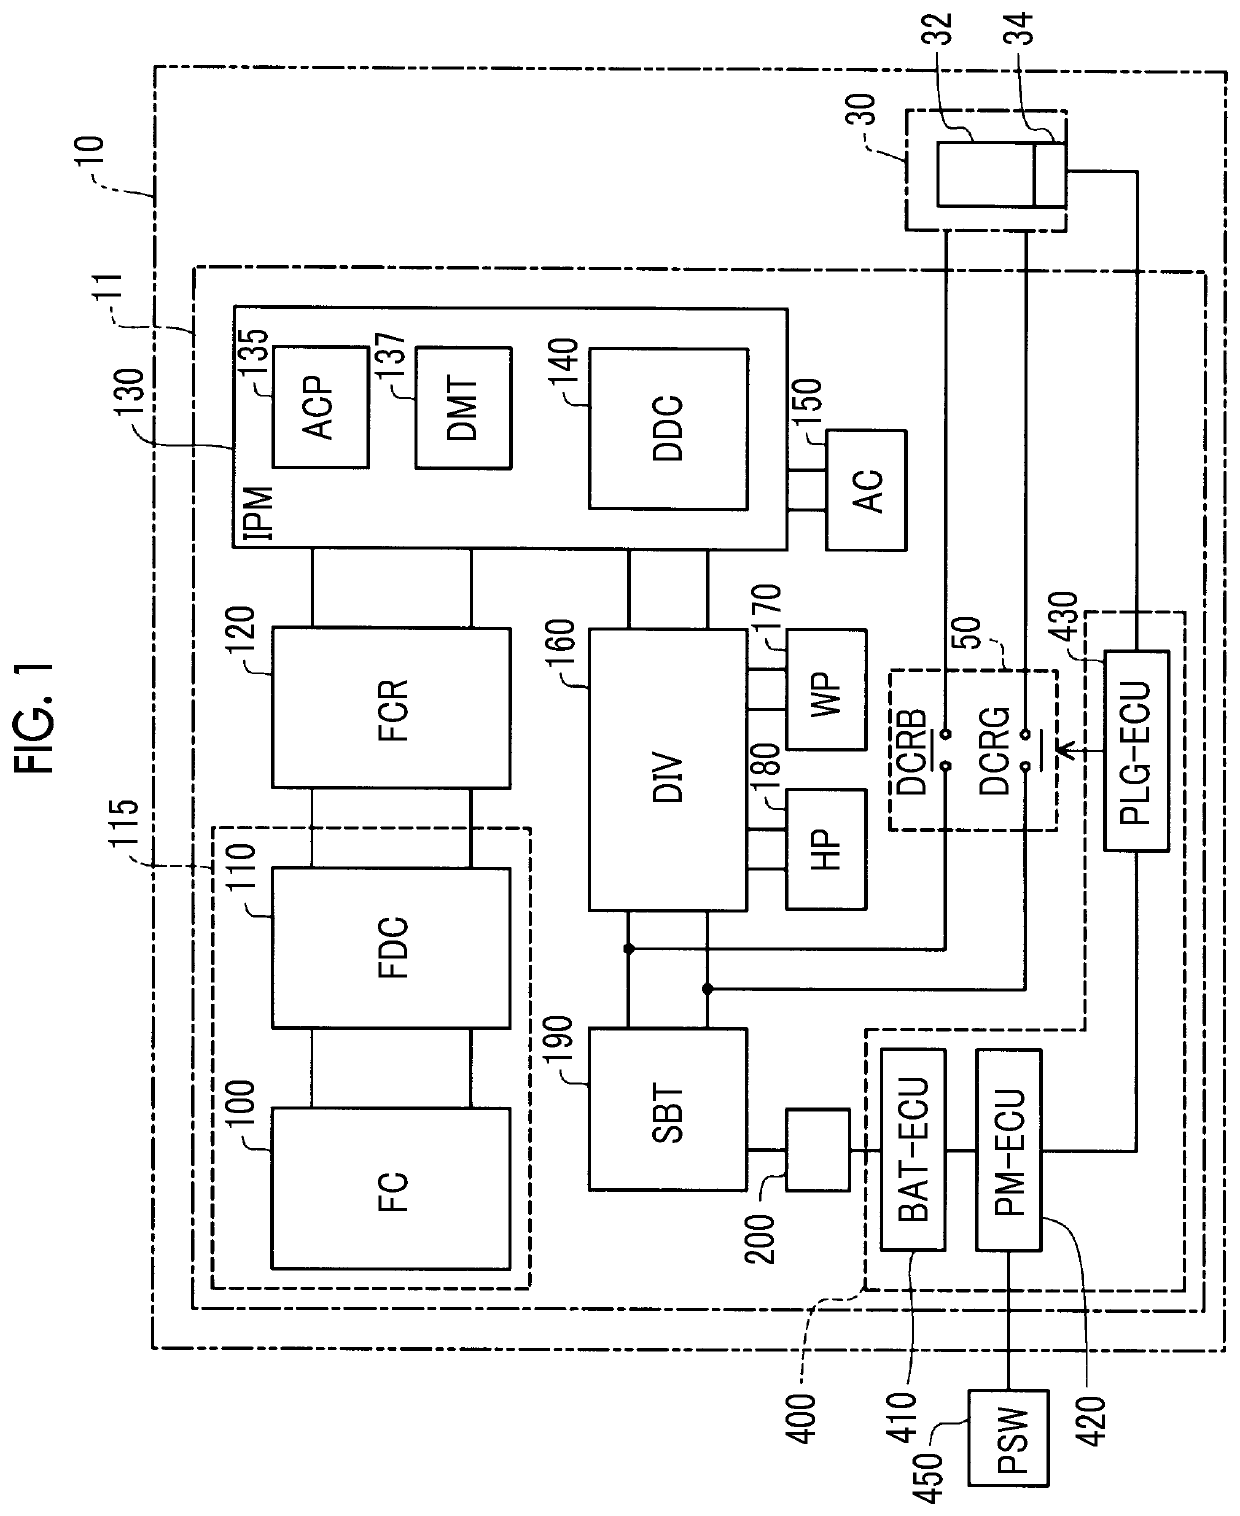 External power feed system and electric leak detection method therefor